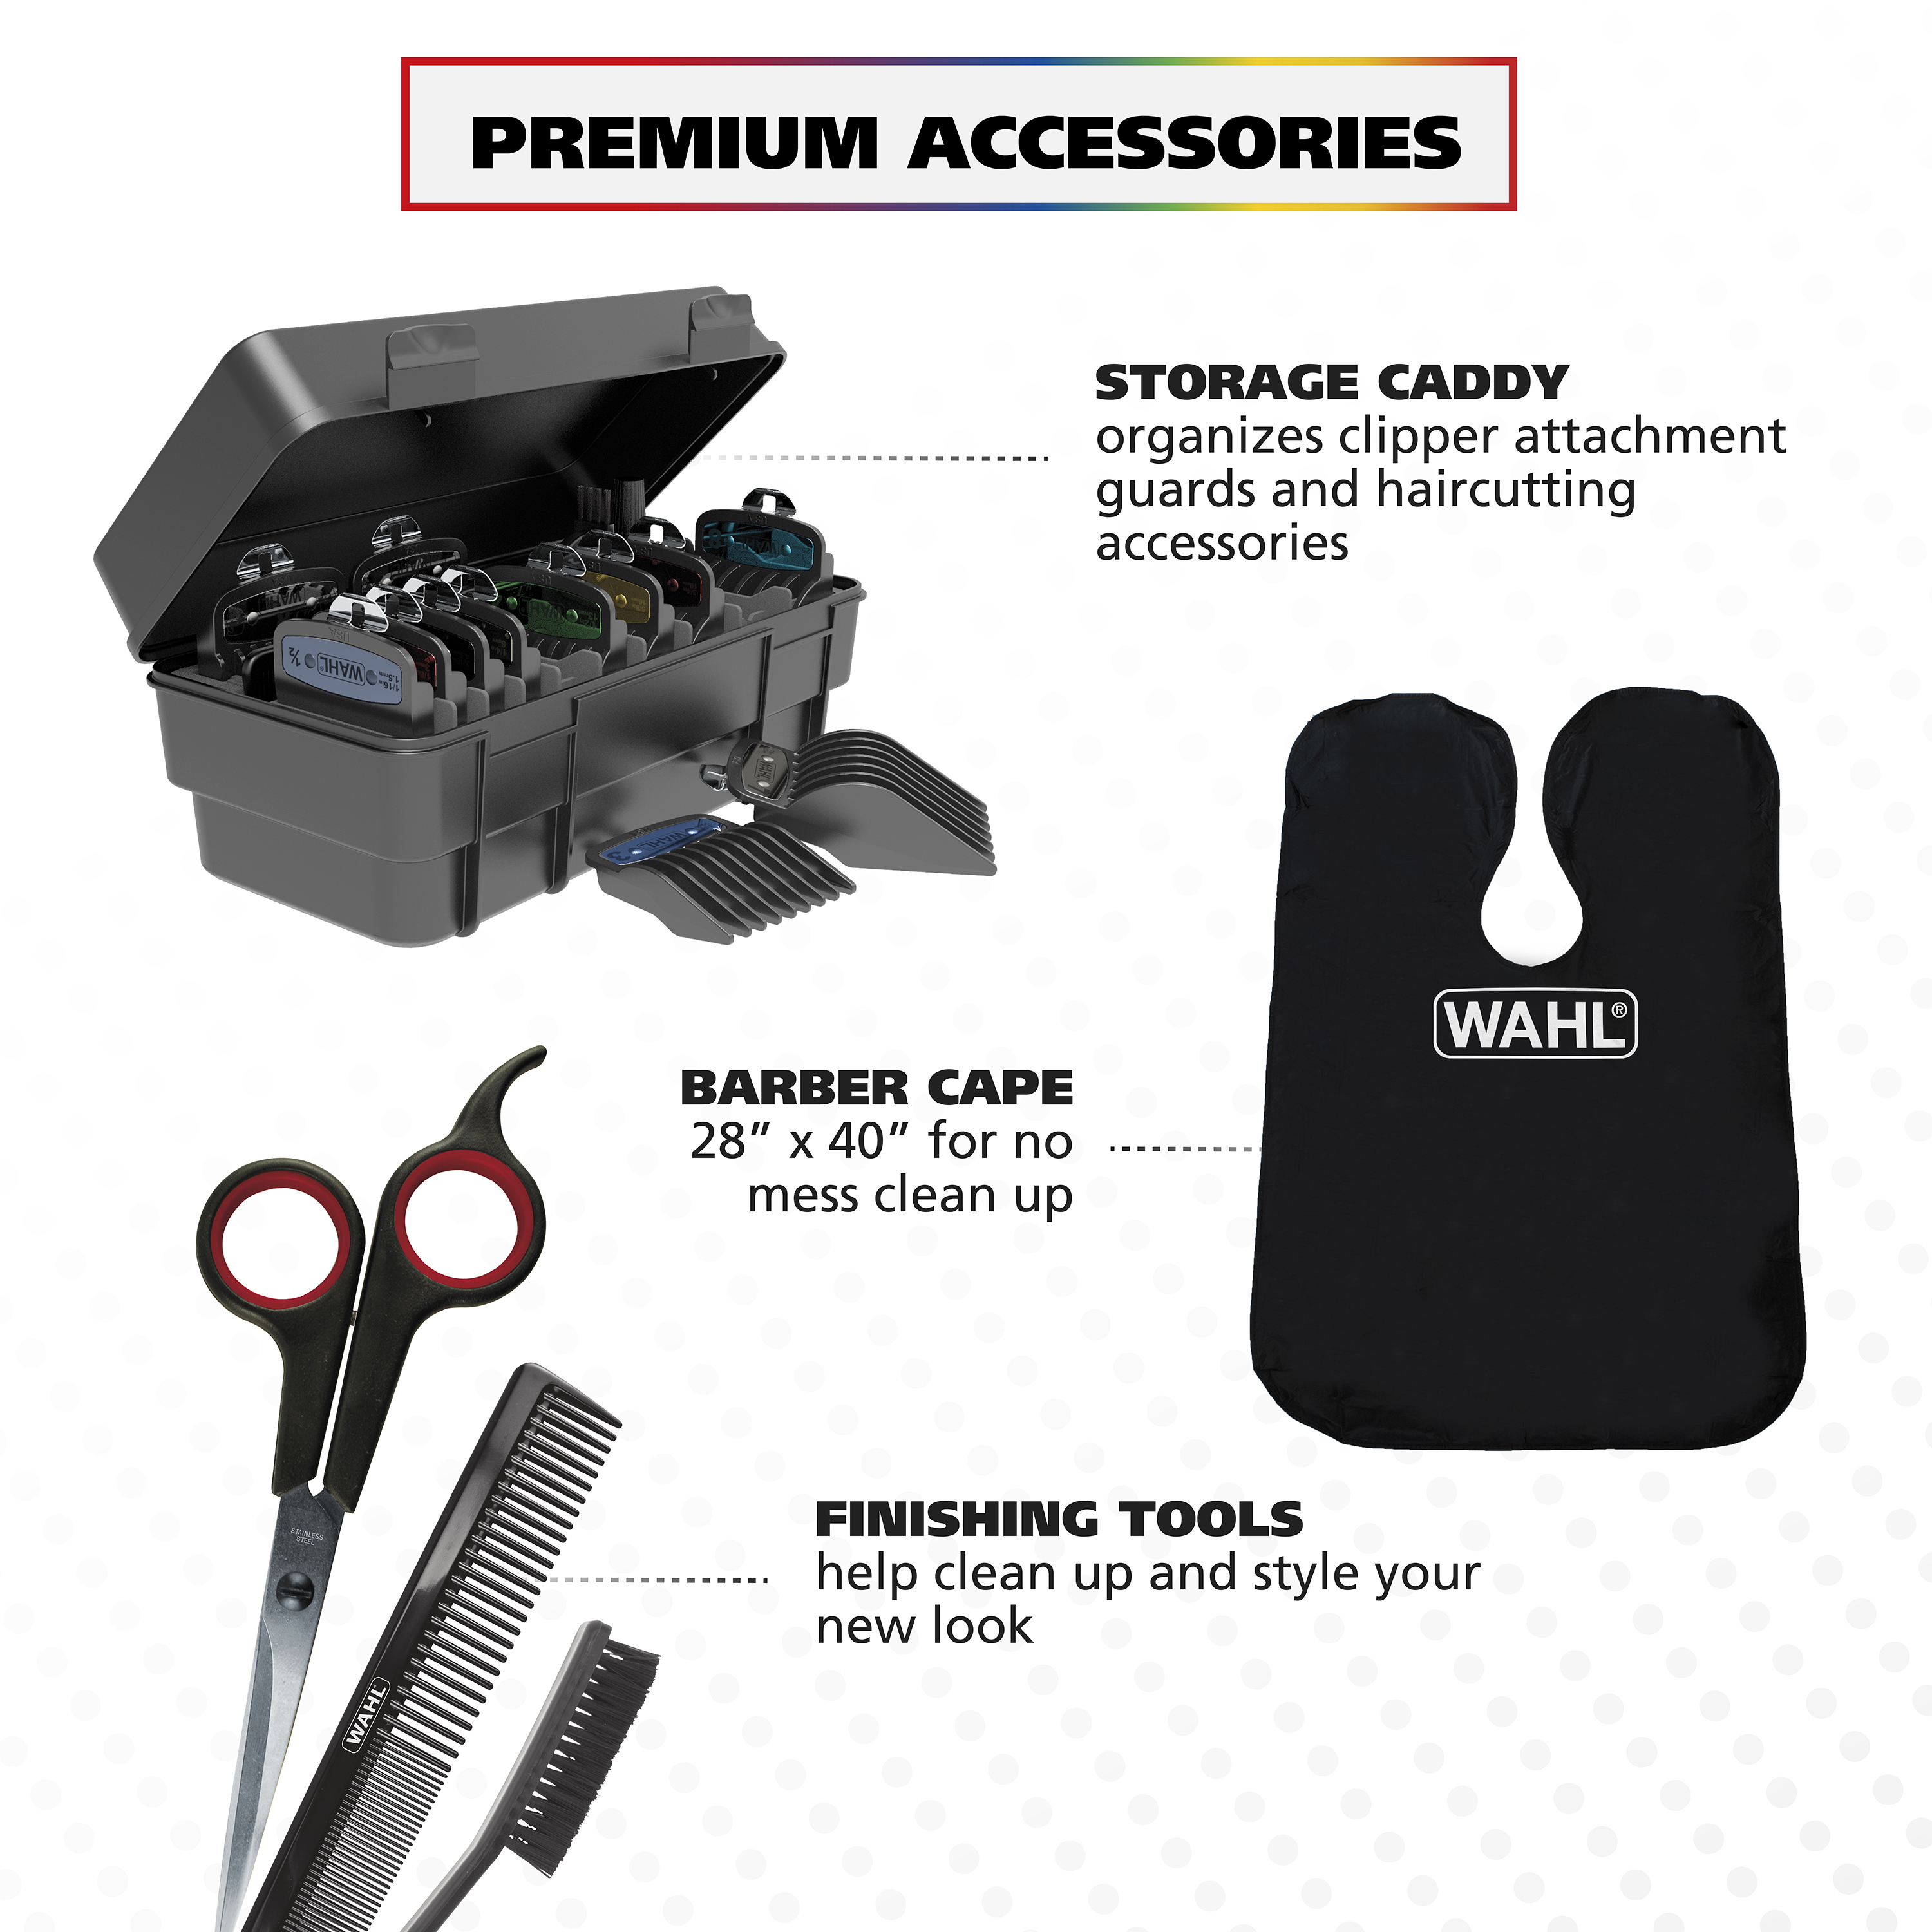 WAHL, Clipper Pro Series Platinum Haircutting Combo Kit with Barbers Shears Model 79804100, Black - 3